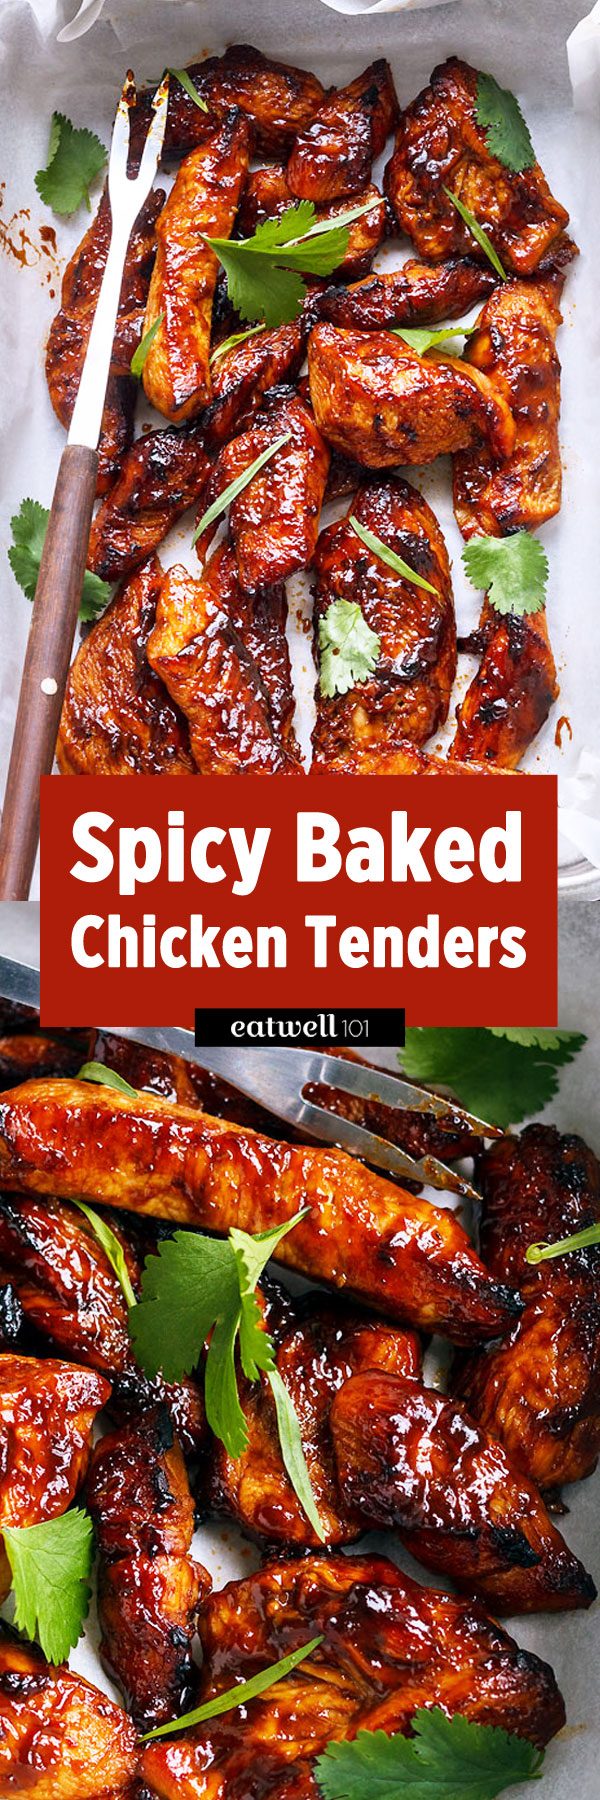 Baked Chicken Tenders - #baked #chicken #recipe #eatwell101 - This baked chicken tenders recipe is an easy and heathy dinner to include into your meals rotation.